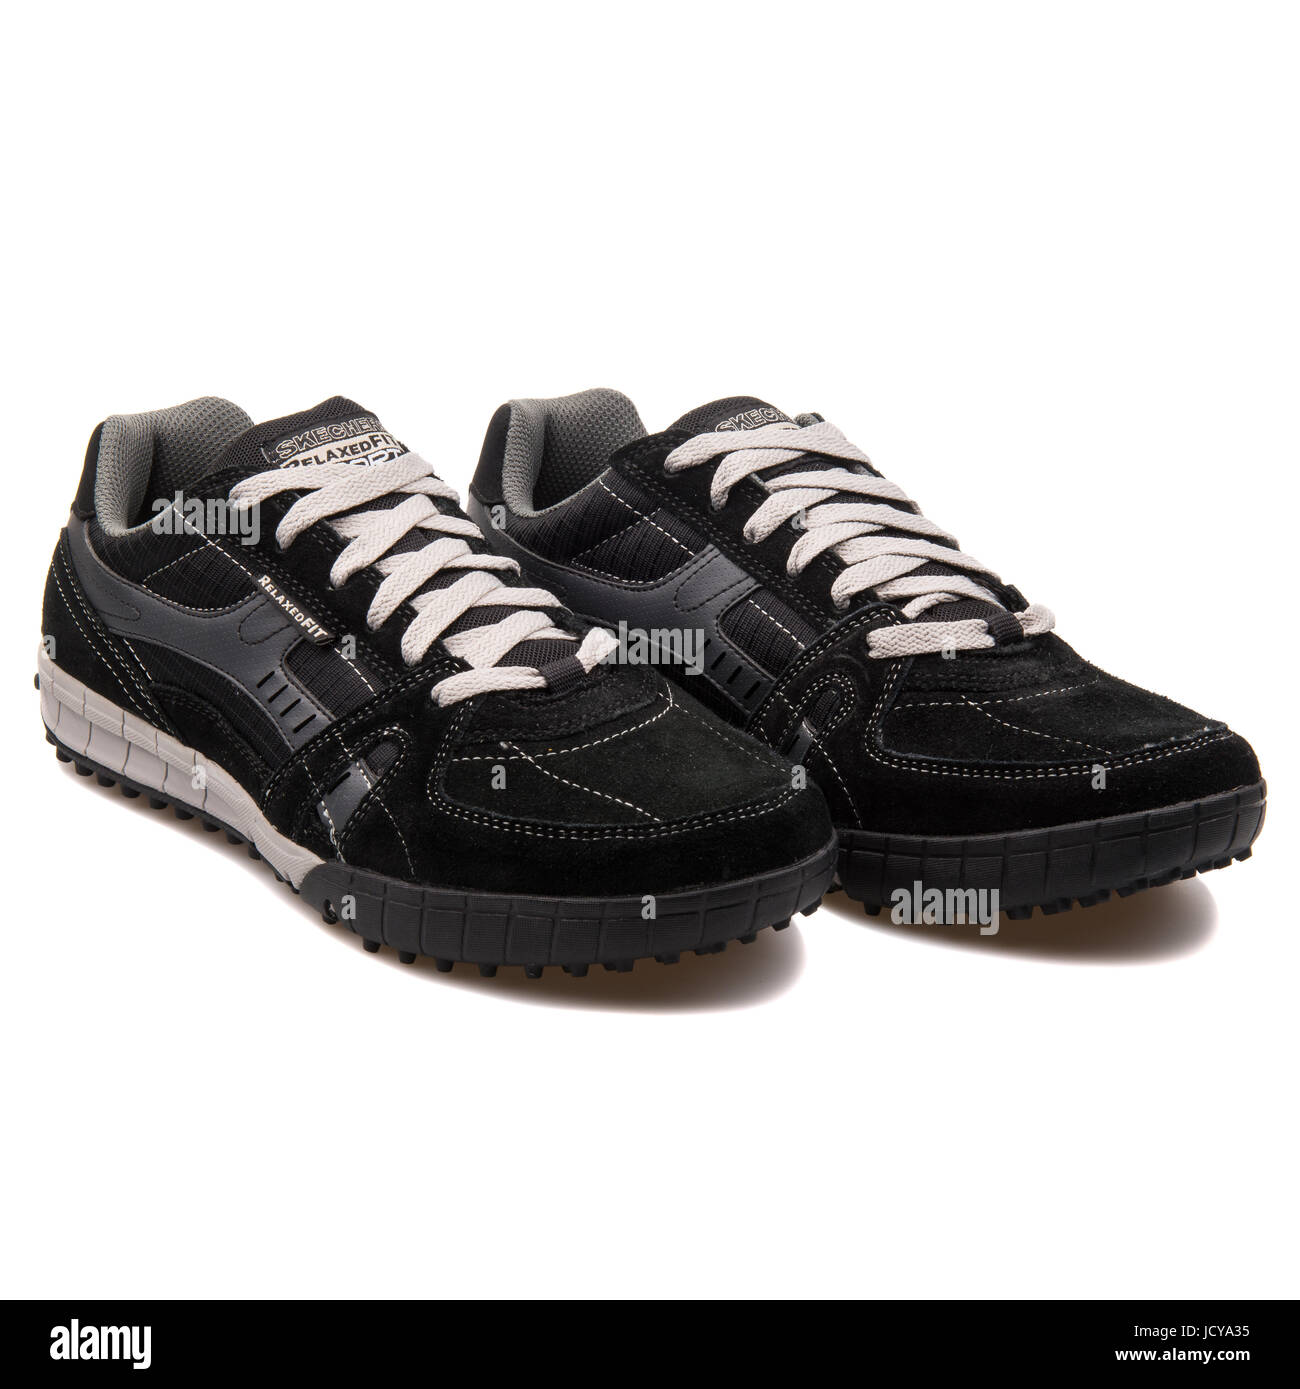 Skechers Floater Black and Grey Men's Sneakers - 51328-BKGY Stock Photo -  Alamy